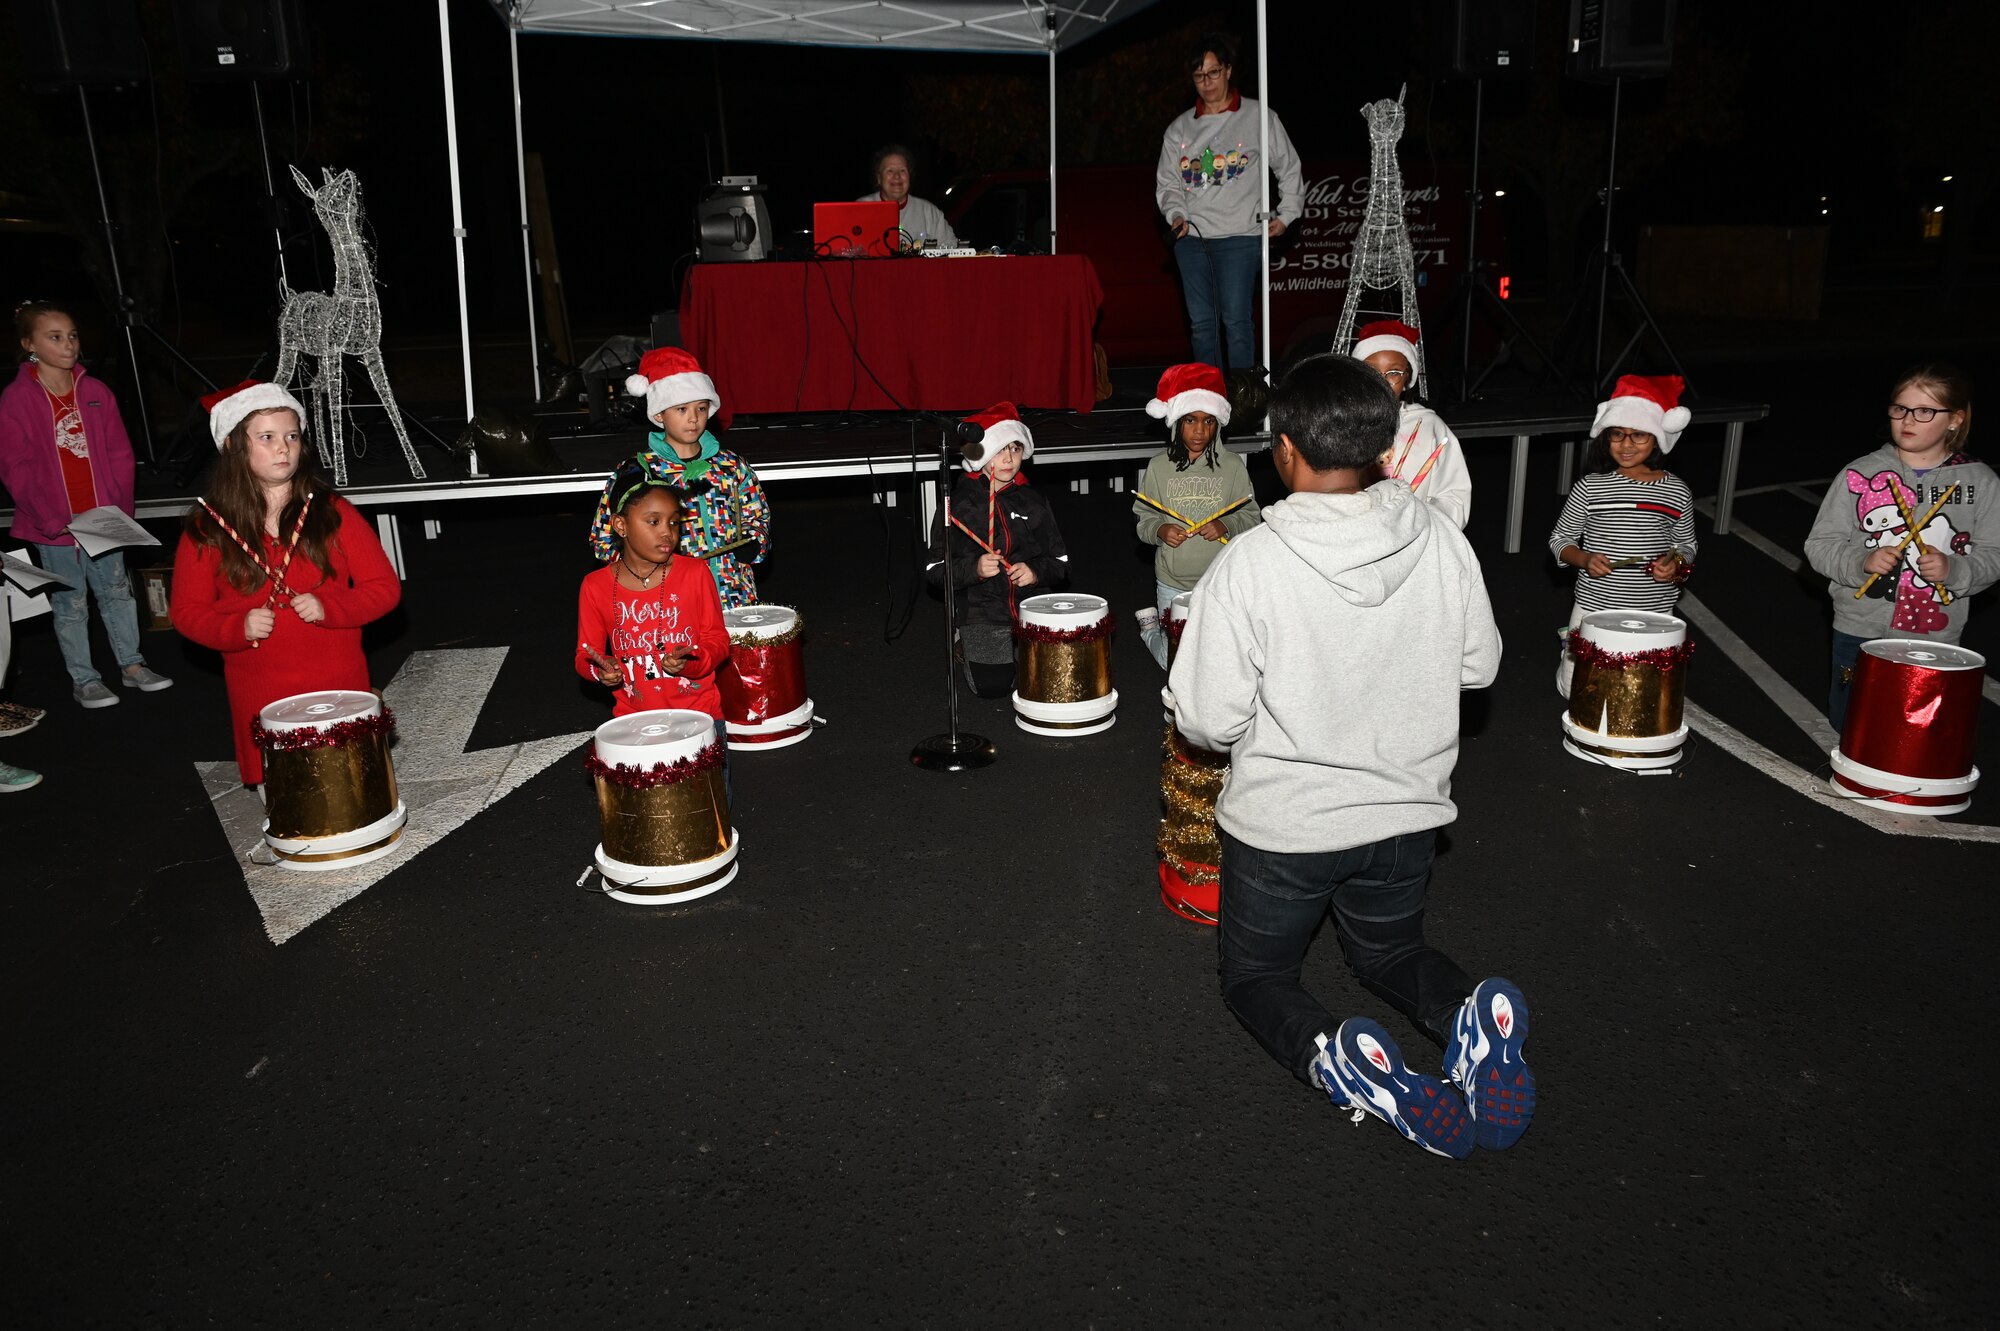 Children from the Seymour Johnson Air Force Base Youth Center play drums at the Holiday Village and vendor fair at Seymour Johnson AFB, North Carolina, Dec. 5, 2022. The tree lighting ceremony brought Airmen and their families together on base to celebrate the holidays. (U.S. Air Force photo by Airman 1st Class Rebecca Sirimarco-Lang)